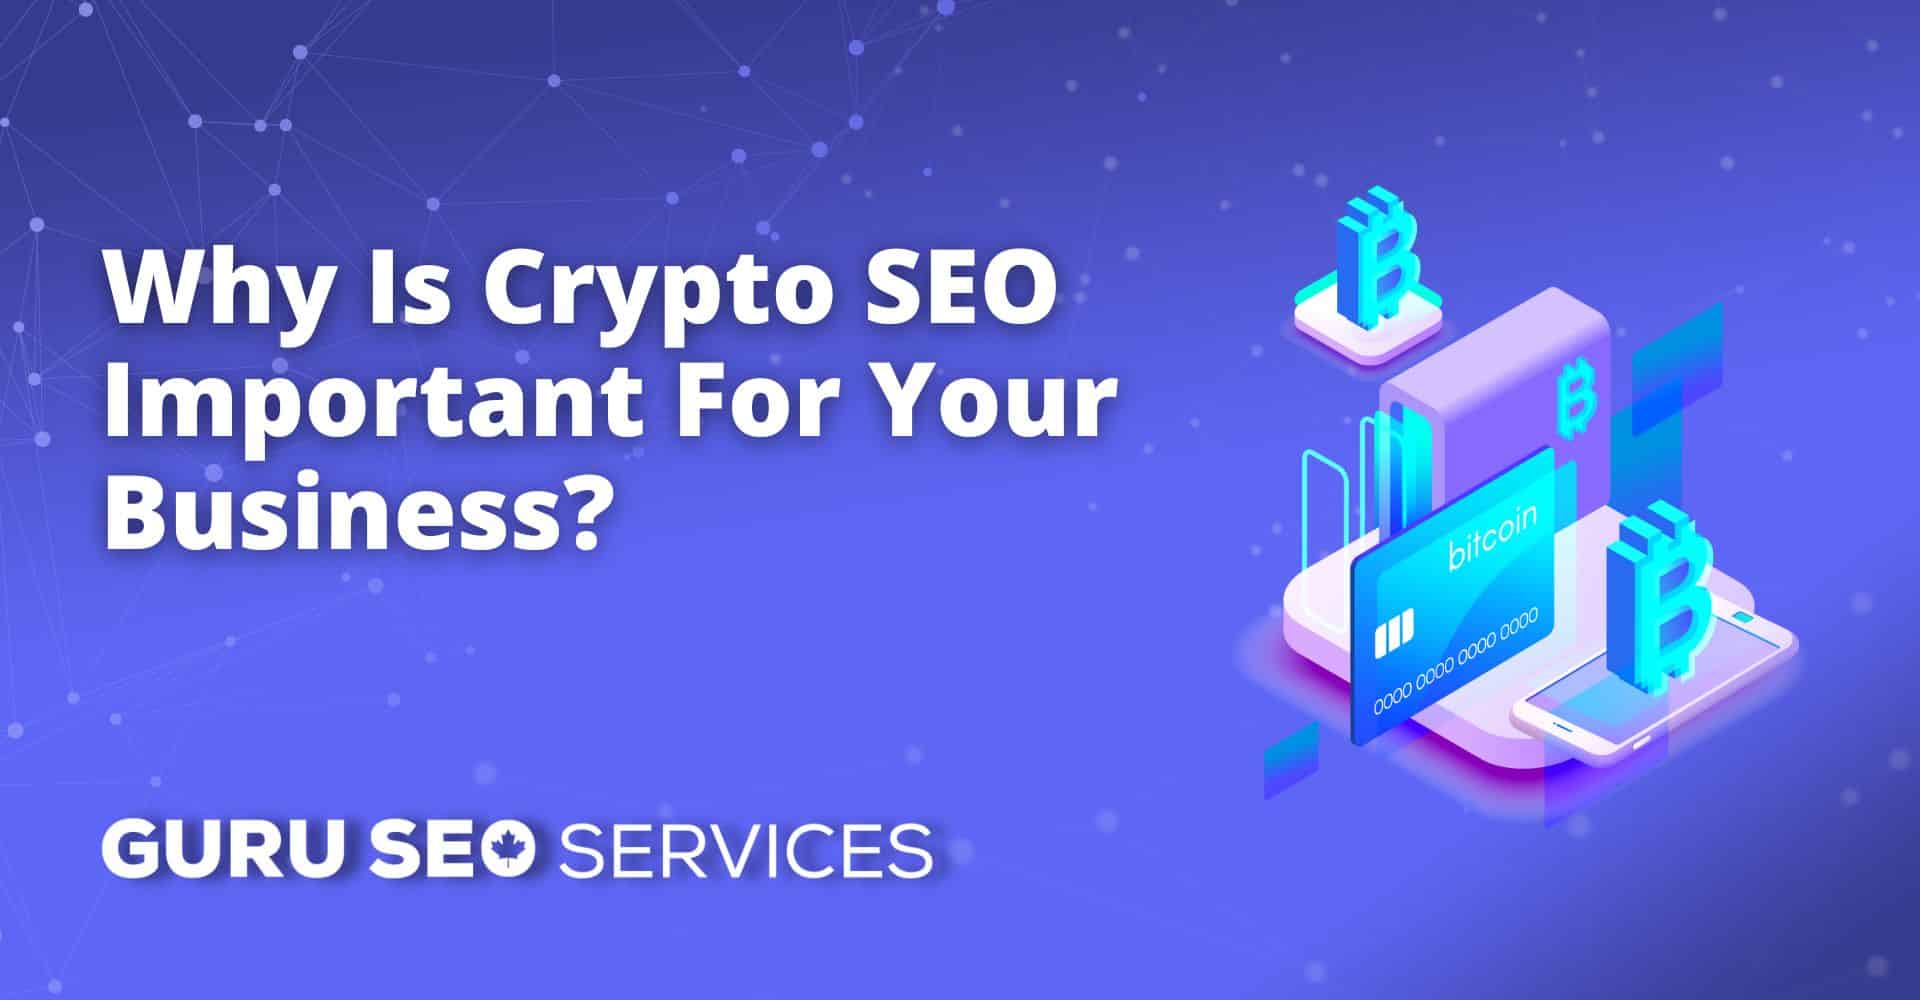 Why is crypt seo important for your business?.